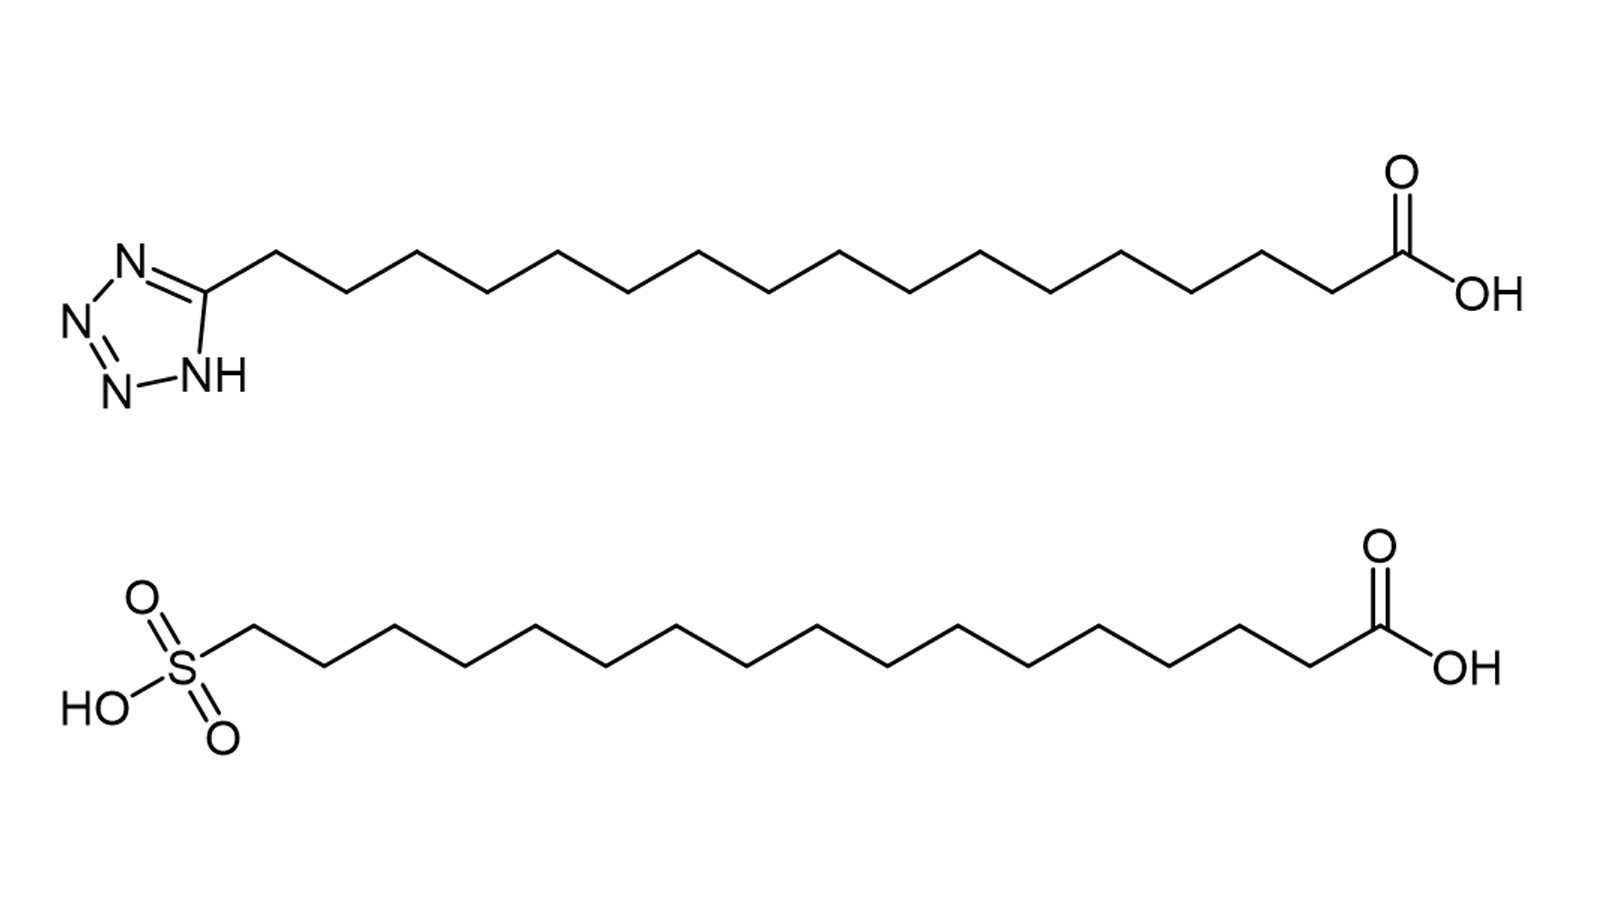 Figure 2. Chemical structures of tetrazole and sulfonic acid analogues of C18 diacids